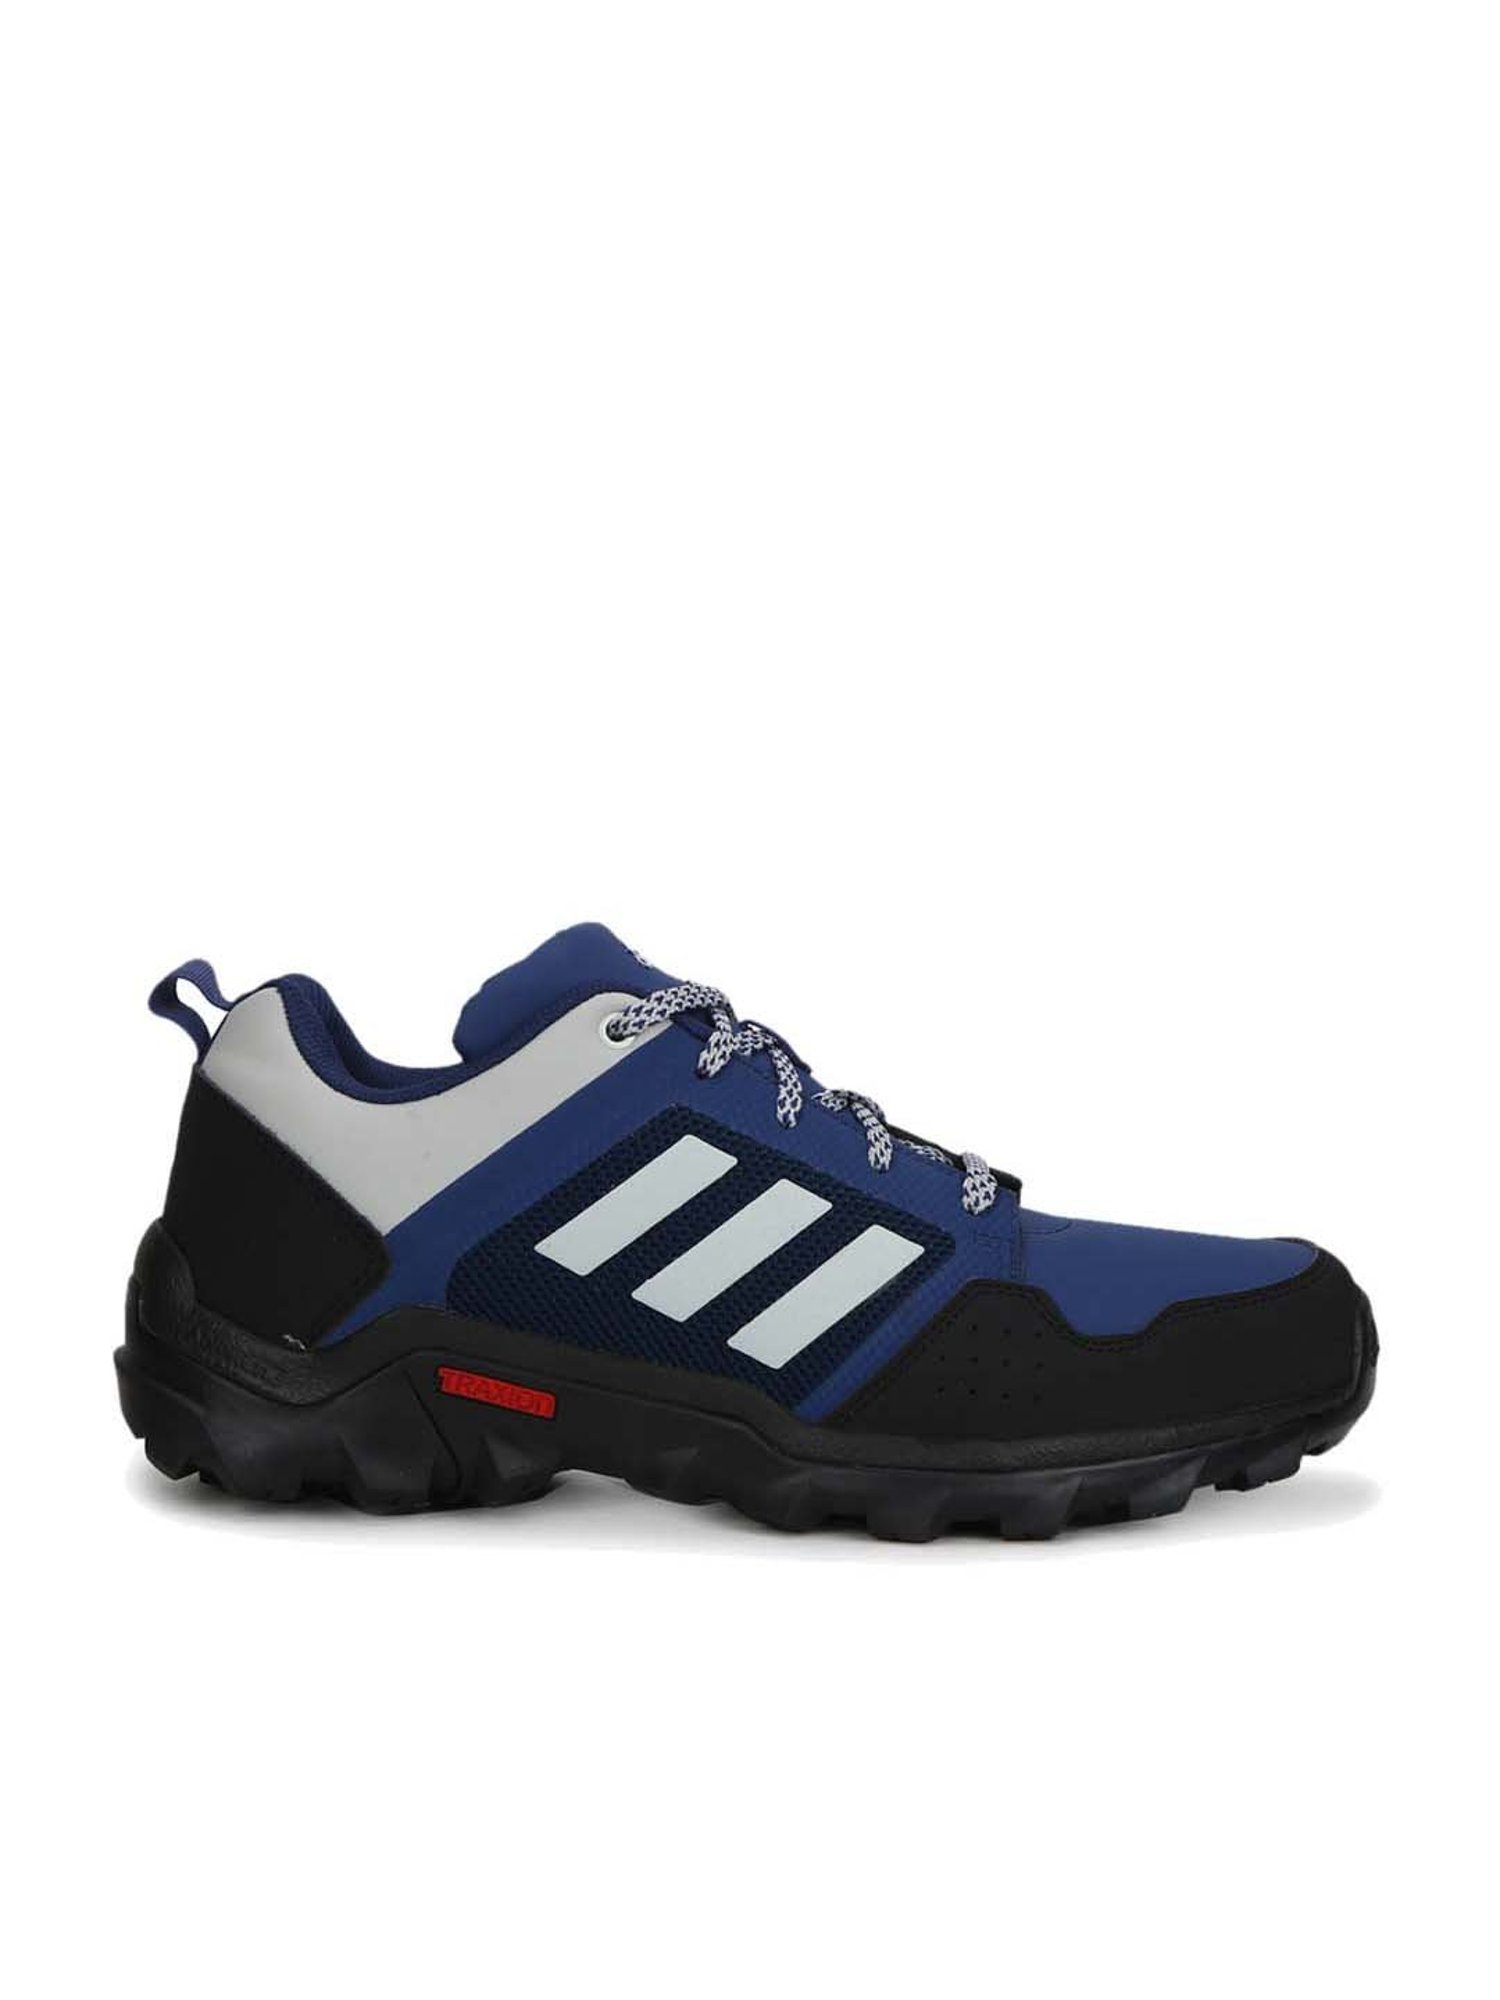 Buy Adidas TERREX CMTK Blue Hiking Shoes for Men at Best Price Tata CLiQ